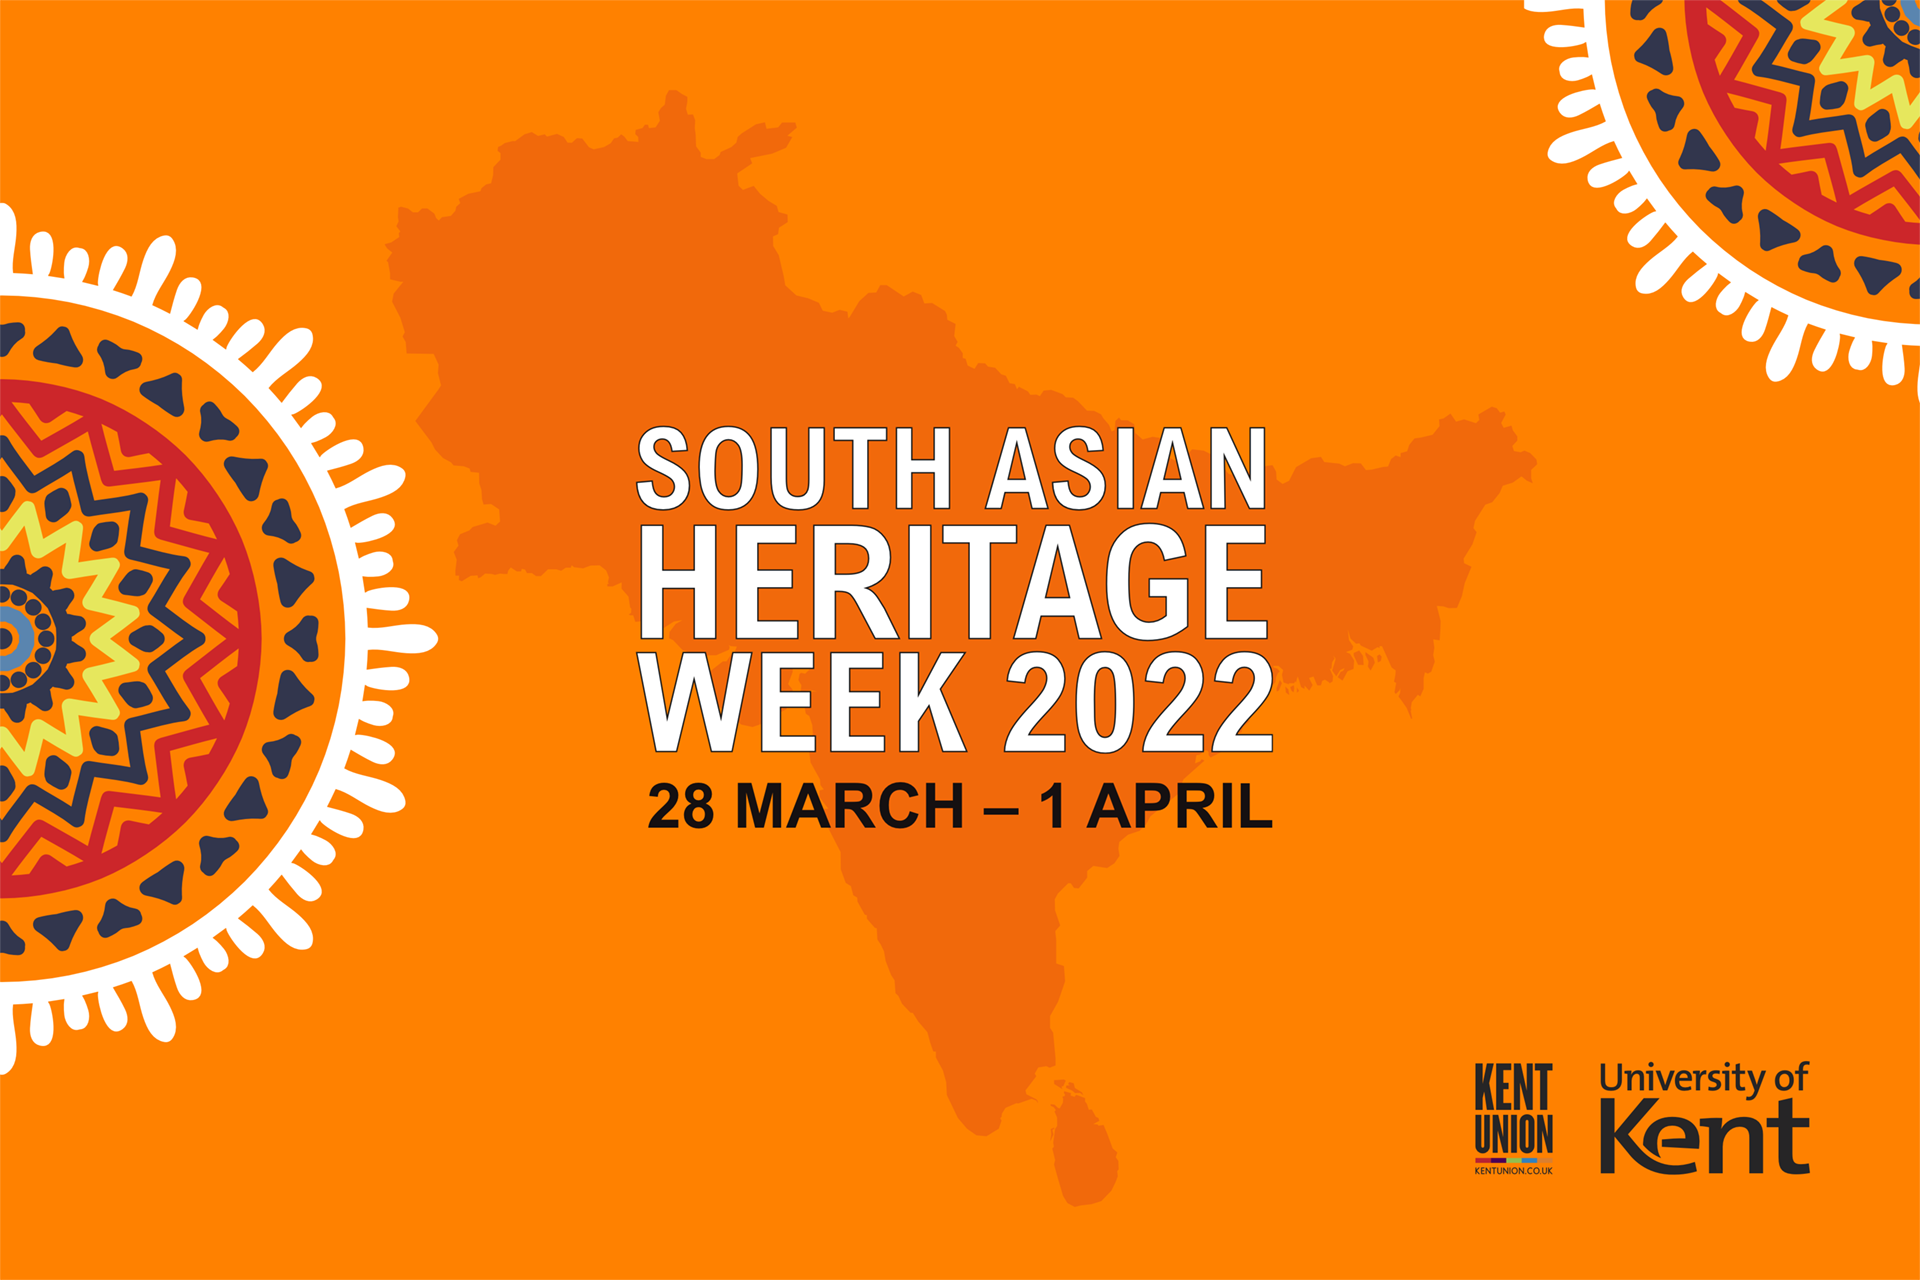 South Asian Heritage Week 2022, 28 March - 1 April